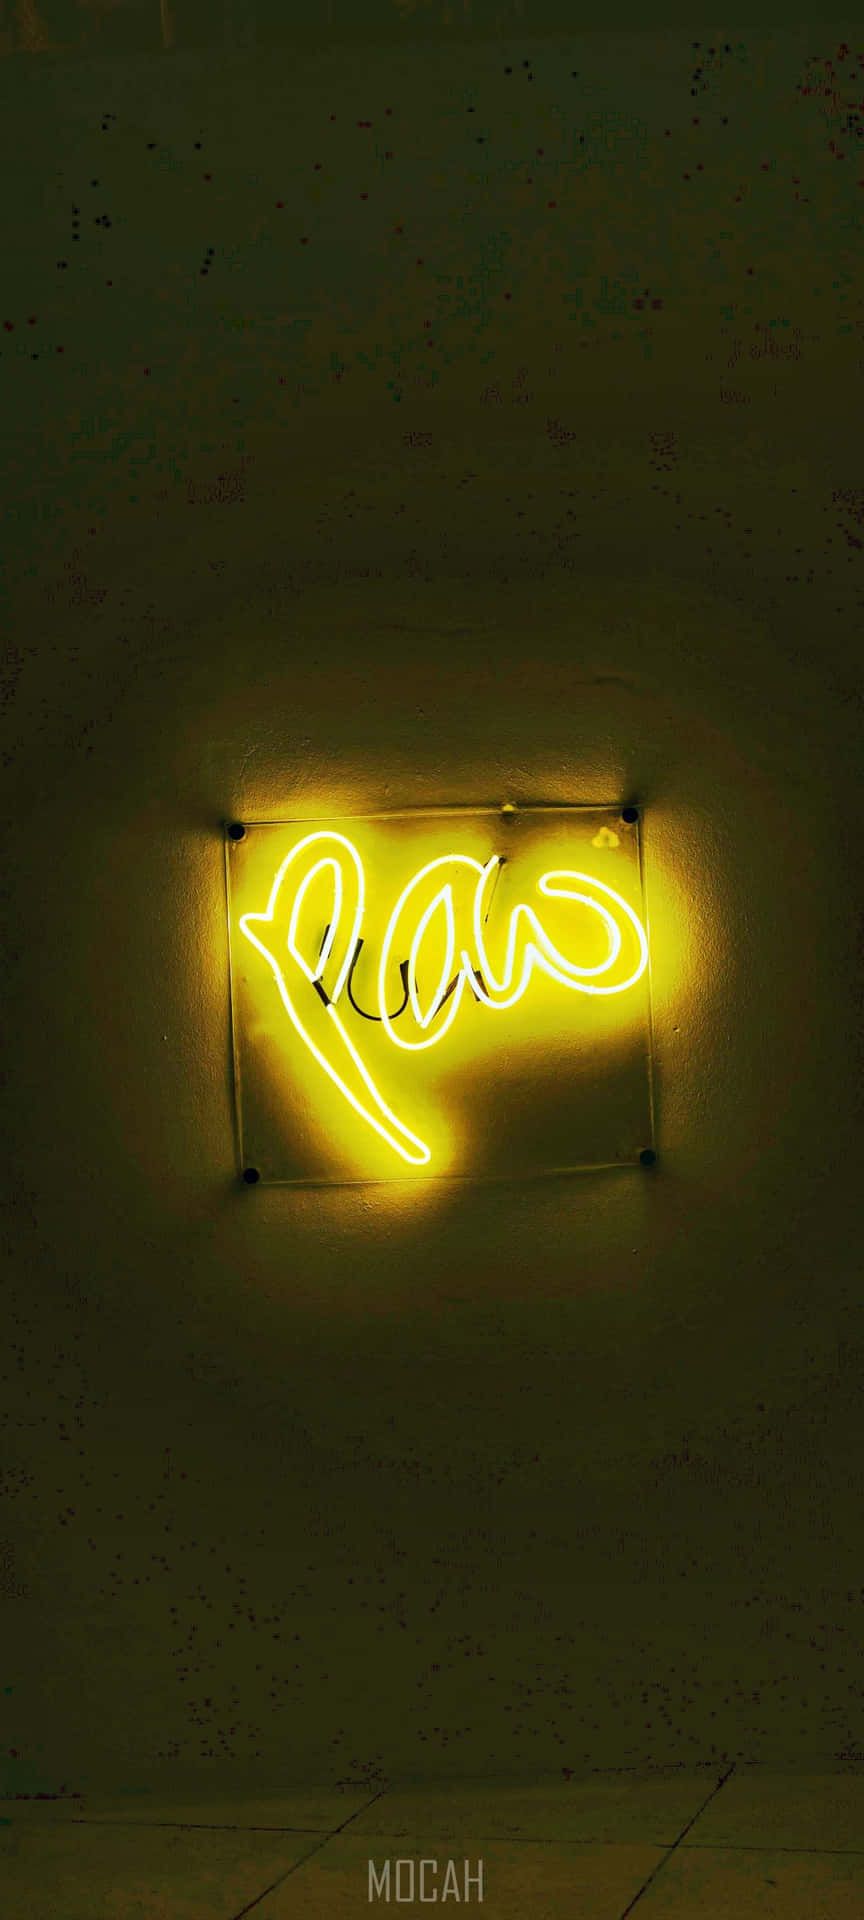 Download A Bright Yellow Neon Light